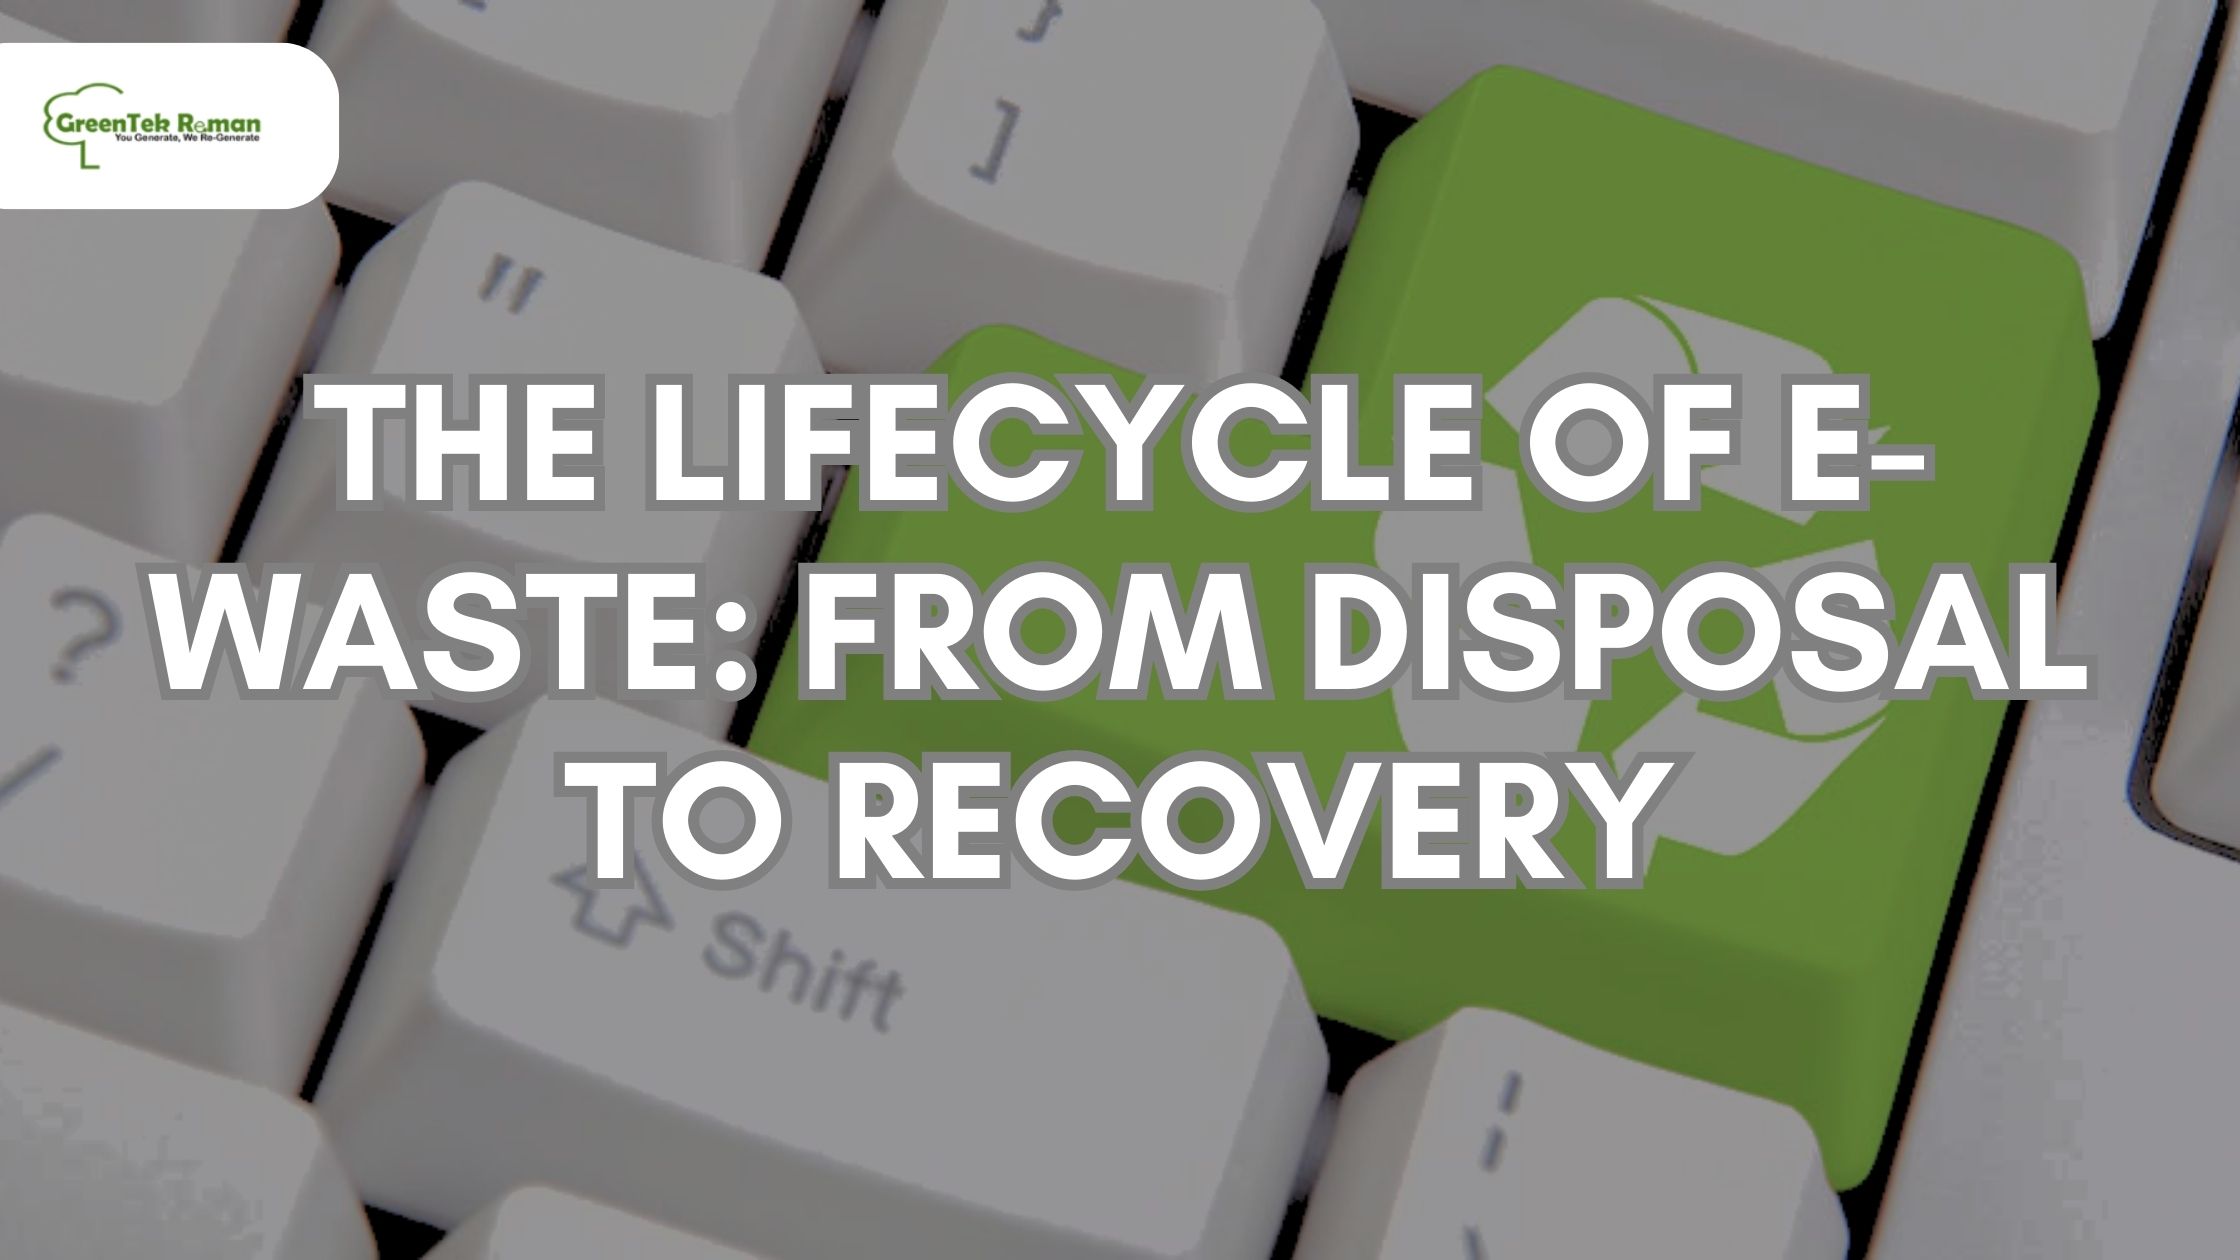 Disposal to Recovery blog banner